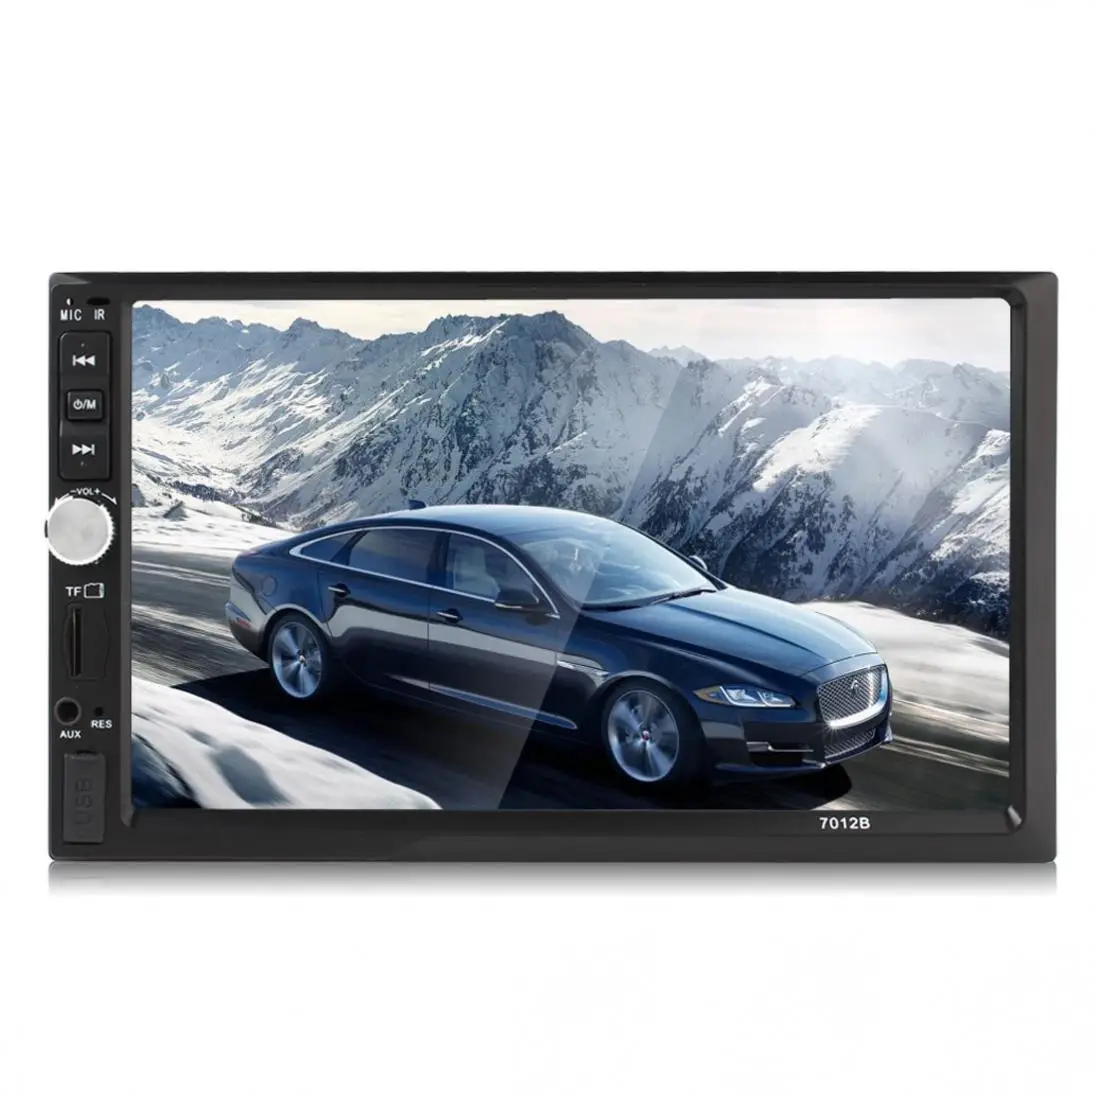 7012B 7 Inch Bluetooth TFT Screen Car Audio Stereo MP5 Player 12V Auto 2-Din Support AUX FM USB SD MMC New